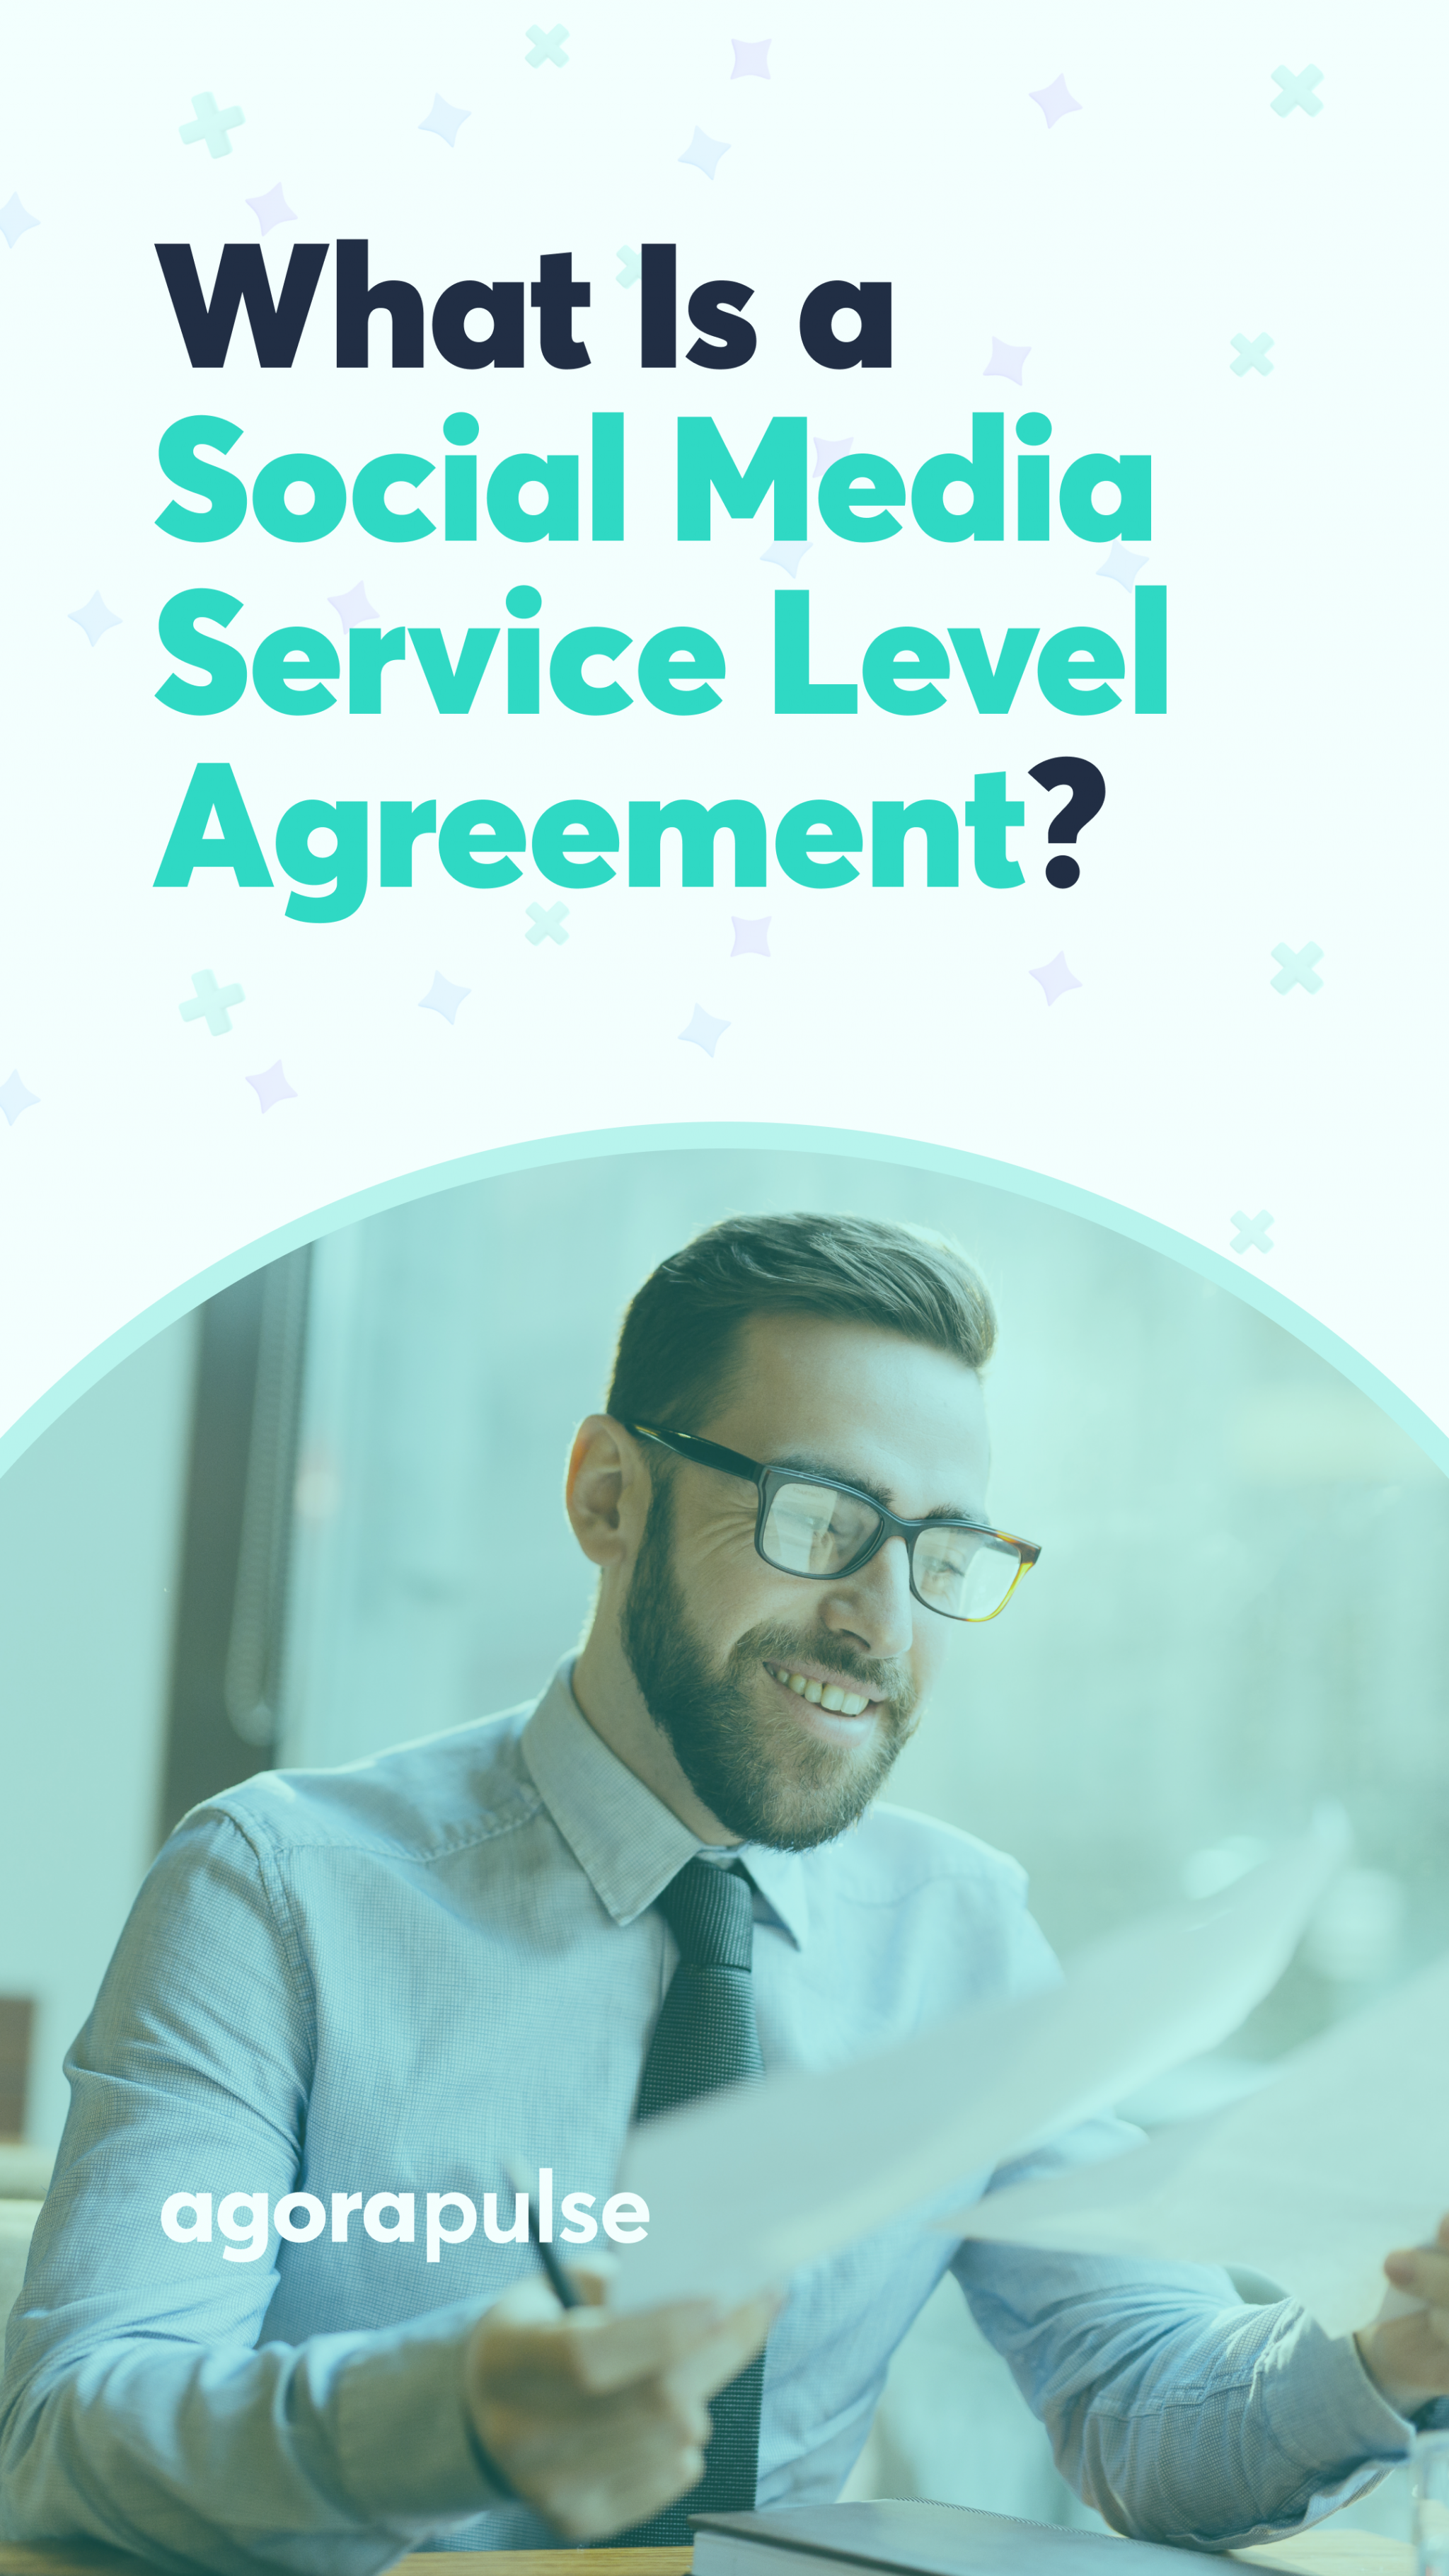 What Is a Social Media Service Level Agreement?